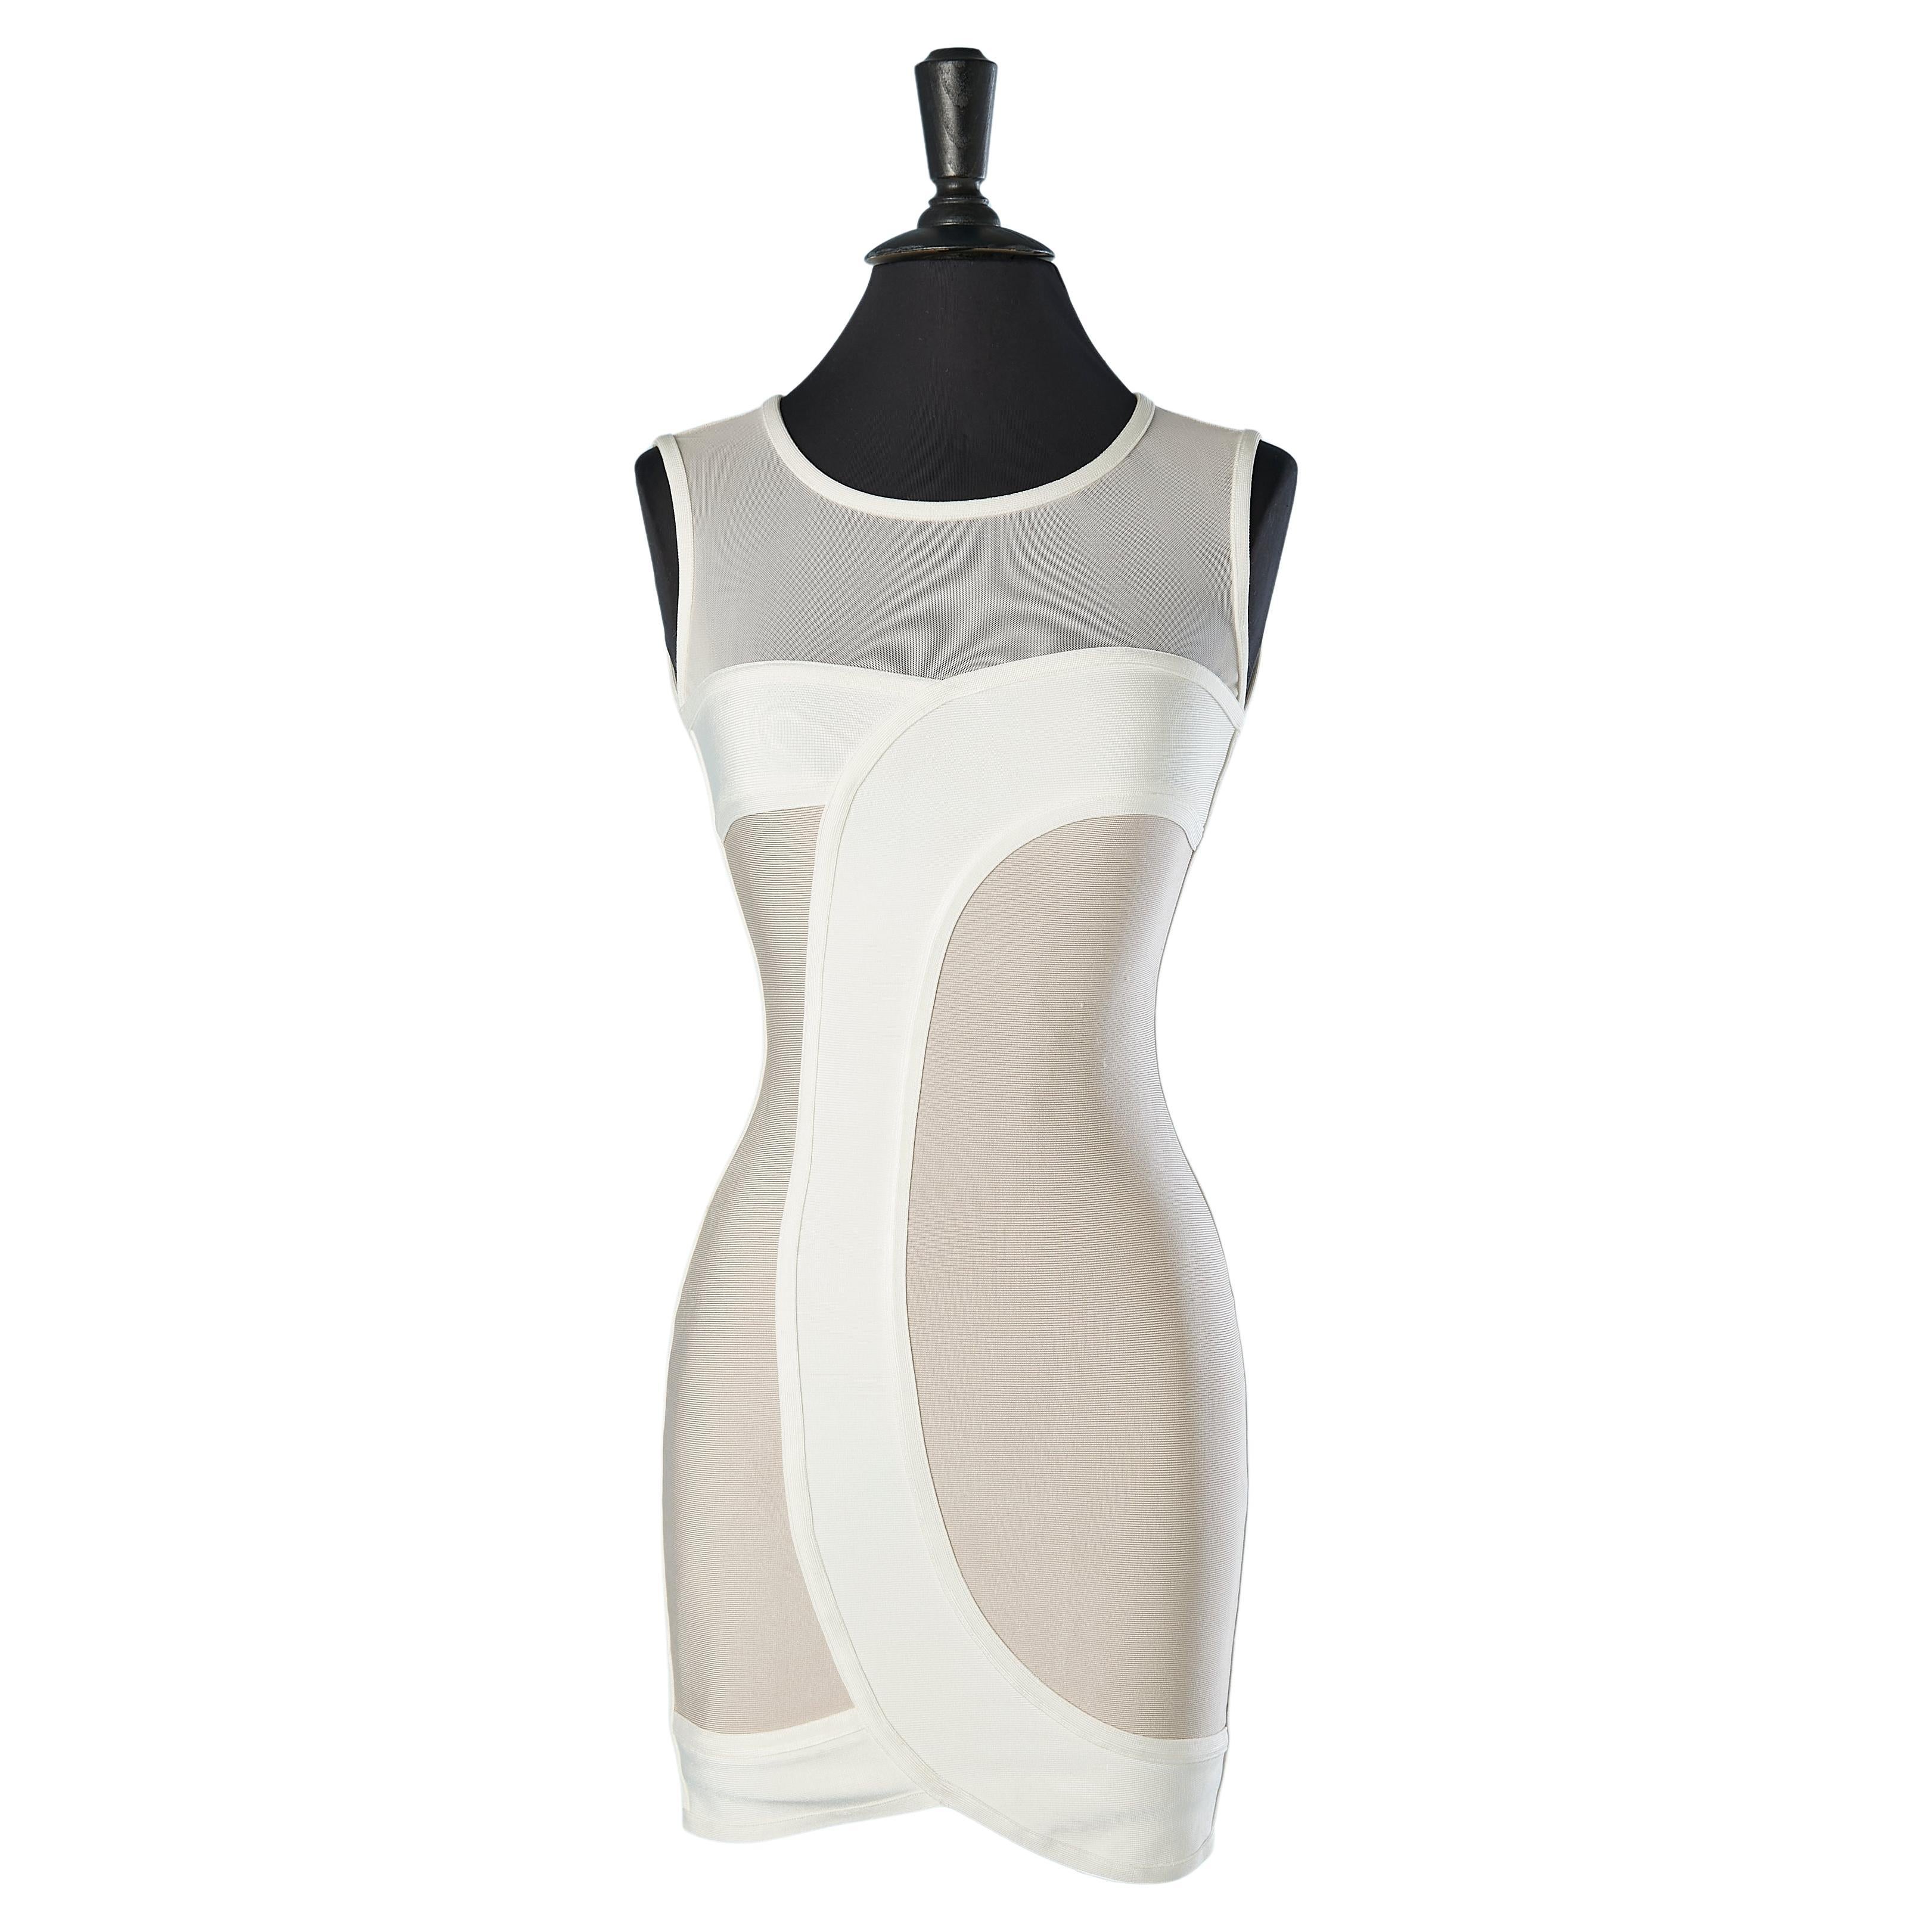 Off-white and beige cocktail dress in rayon knit Hervé Léger  For Sale